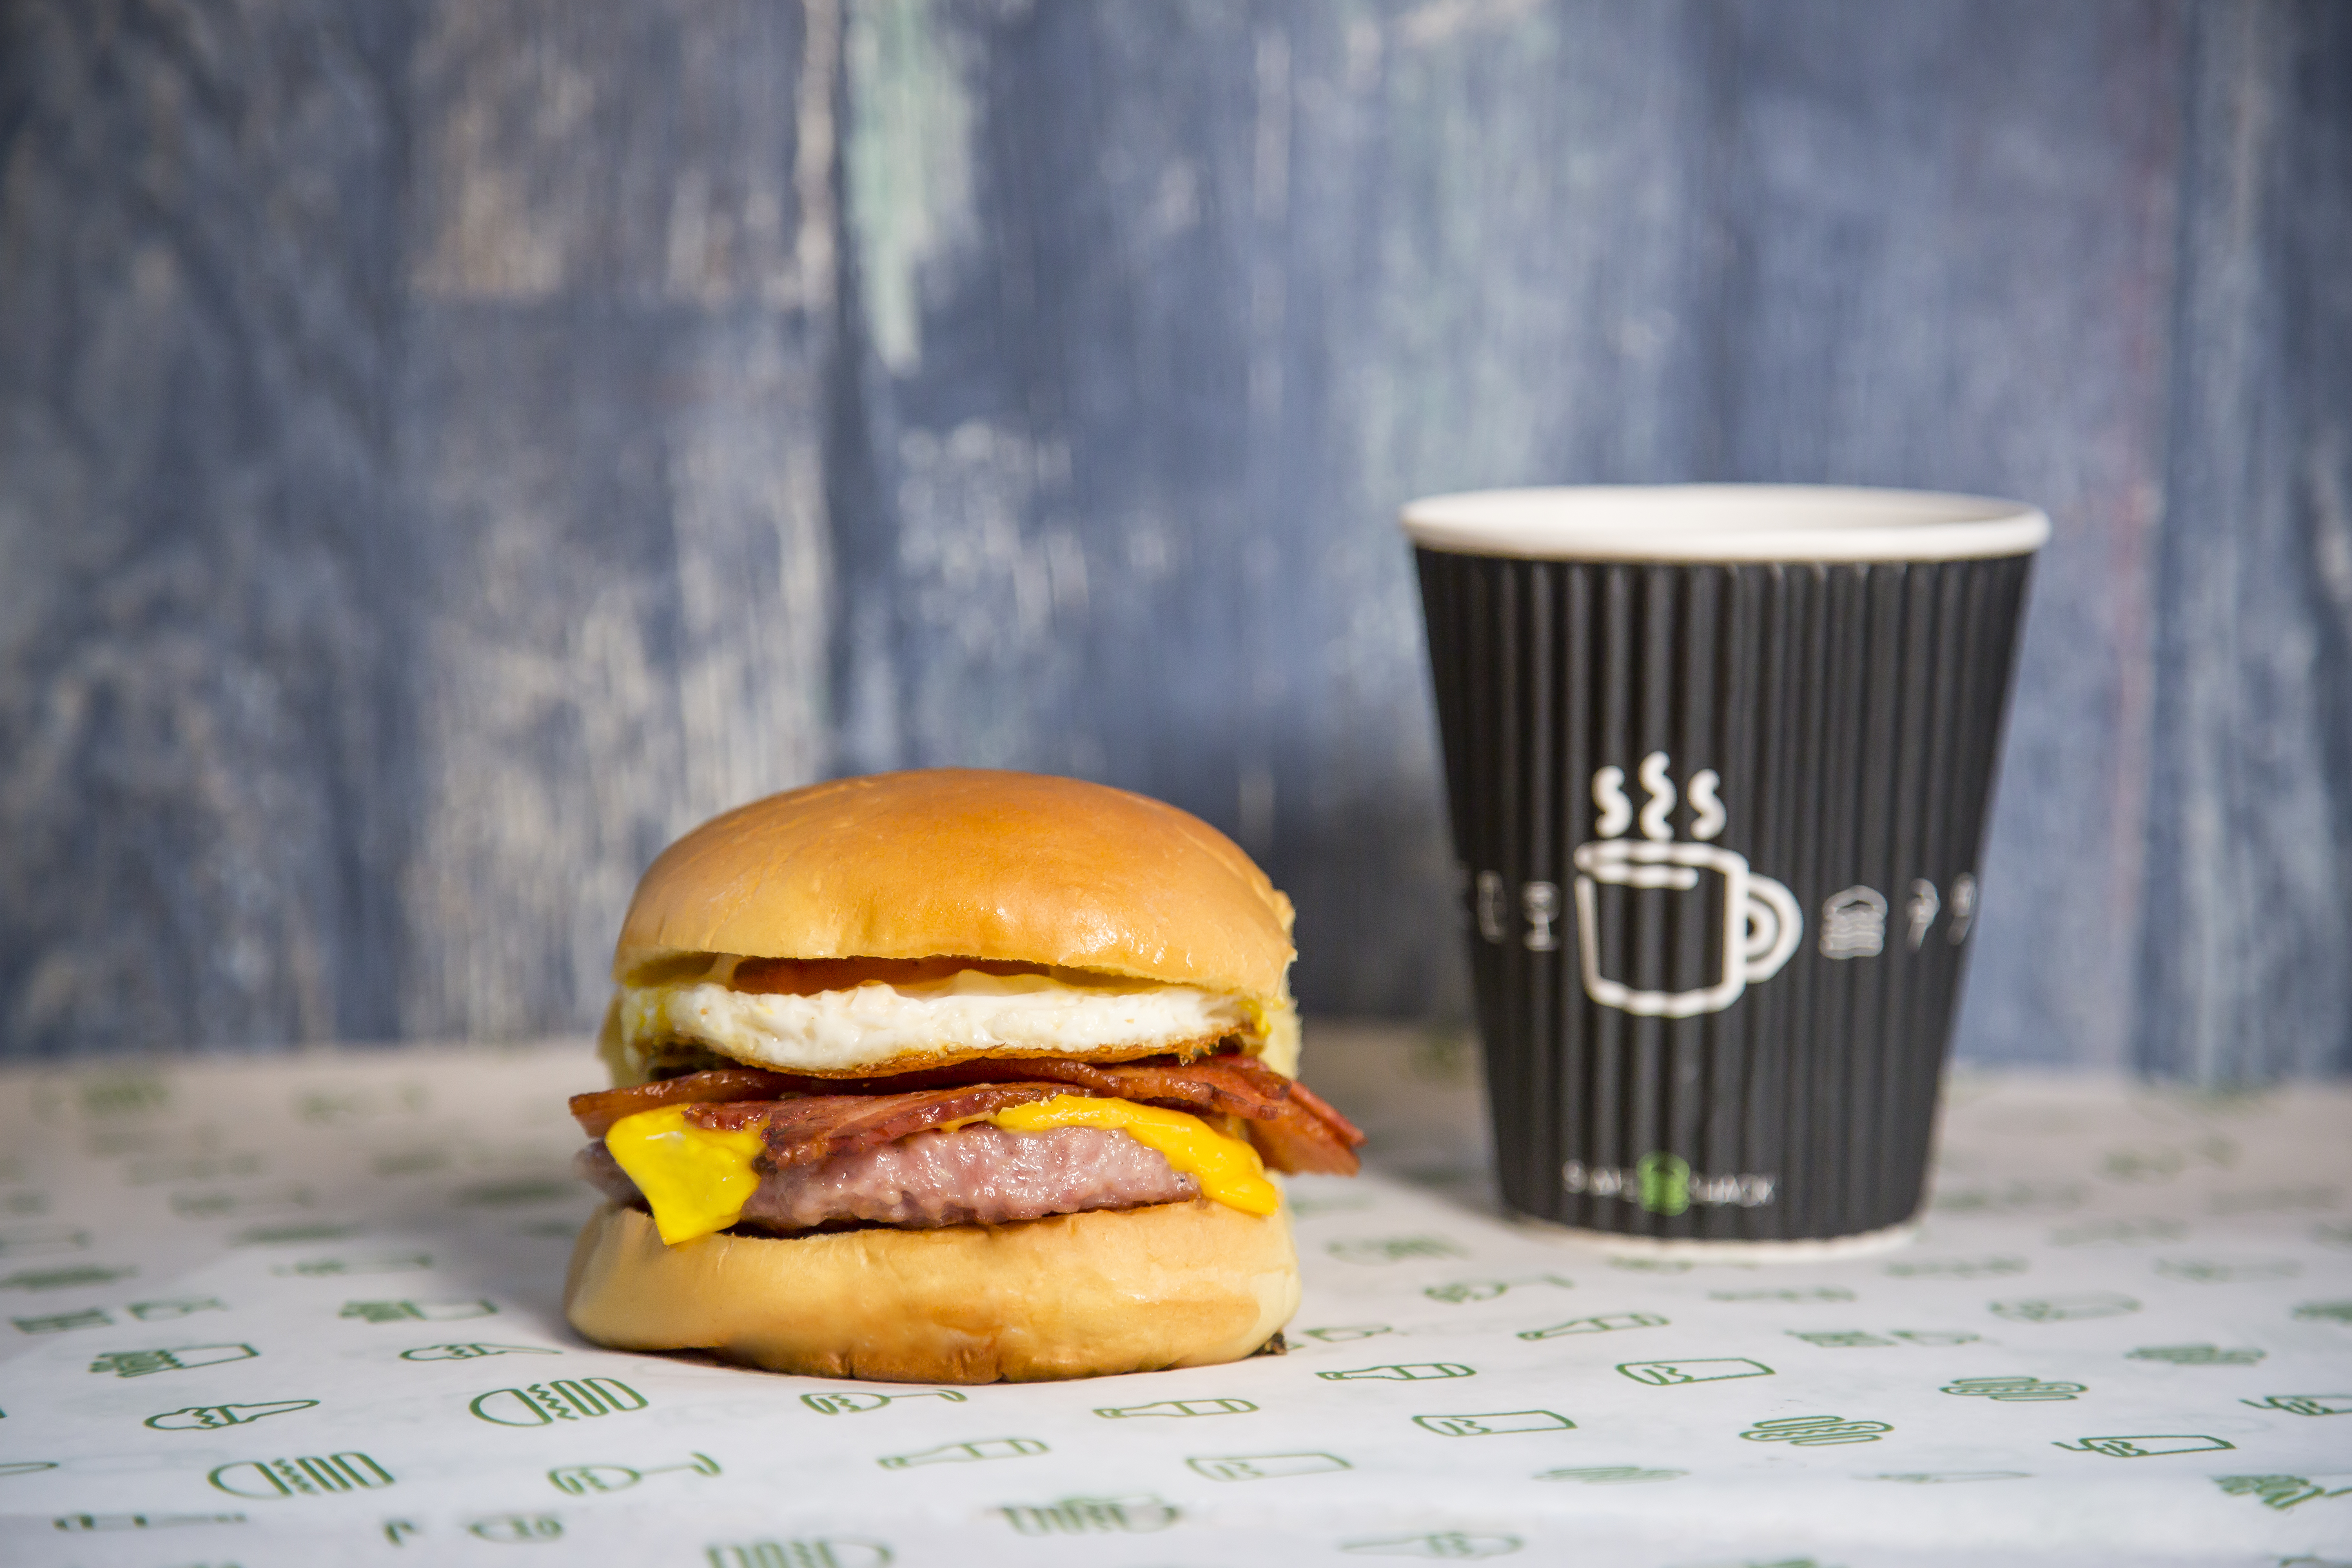 Shake Shack’s sausage, egg, bacon, and cheese breakfast sandwich is now available at Gatwick Airport 